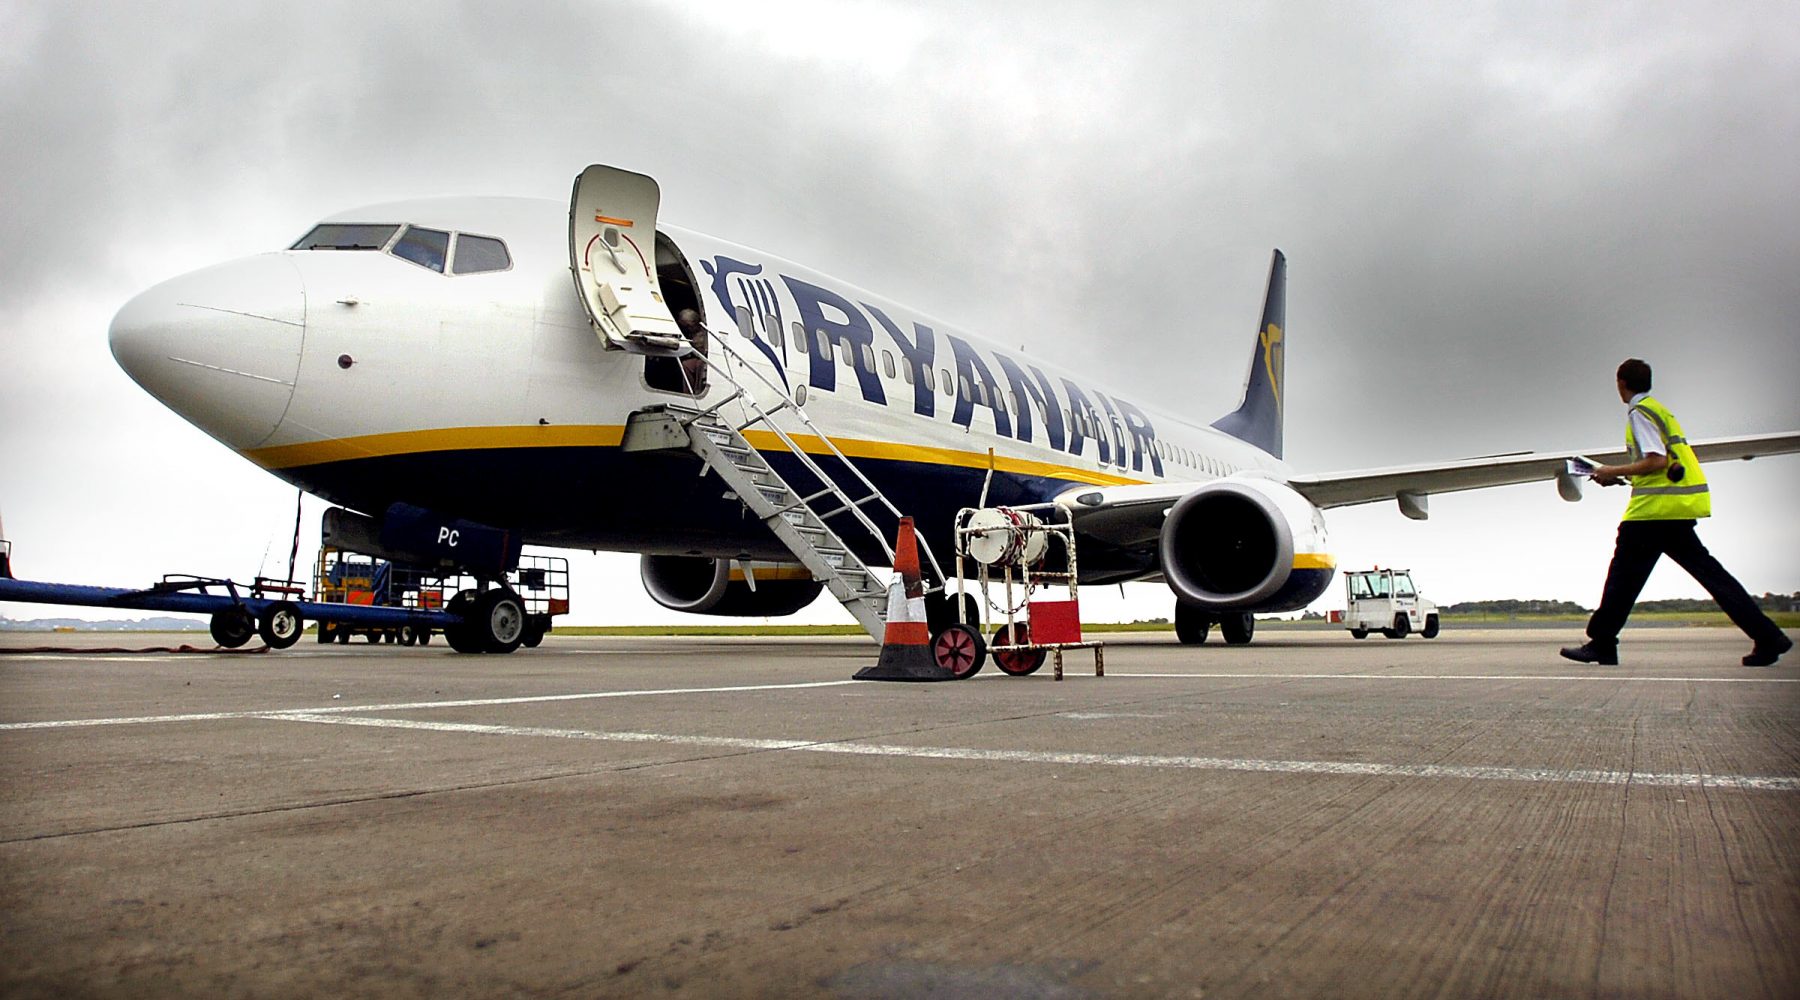 Ryanair to cut up to 3,000 jobs